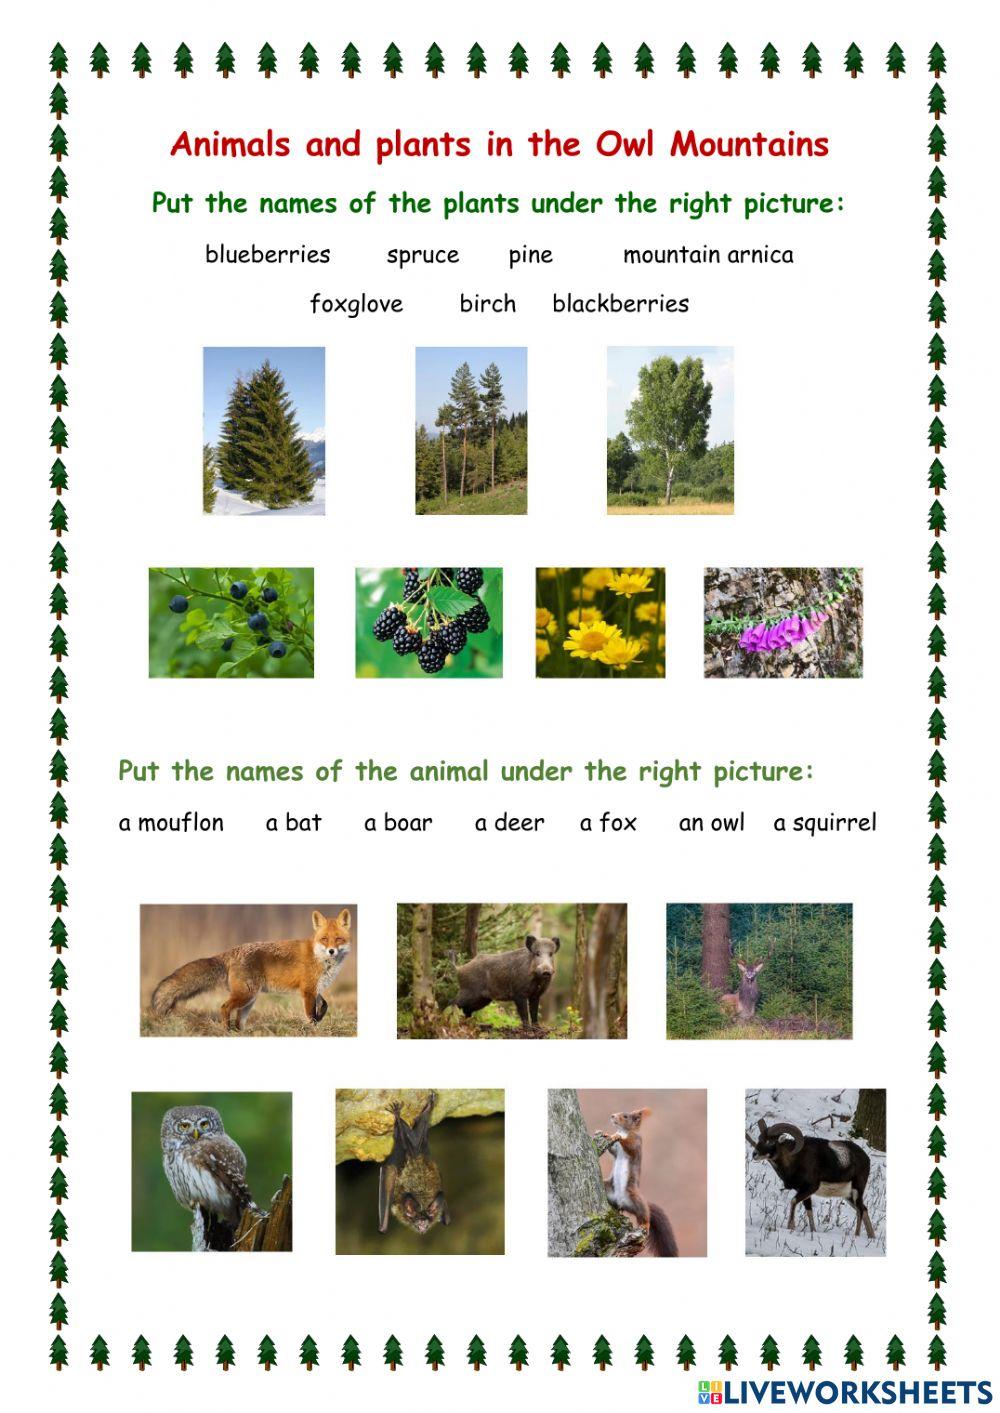 Animals and plants in the Owl Mountains in Poland